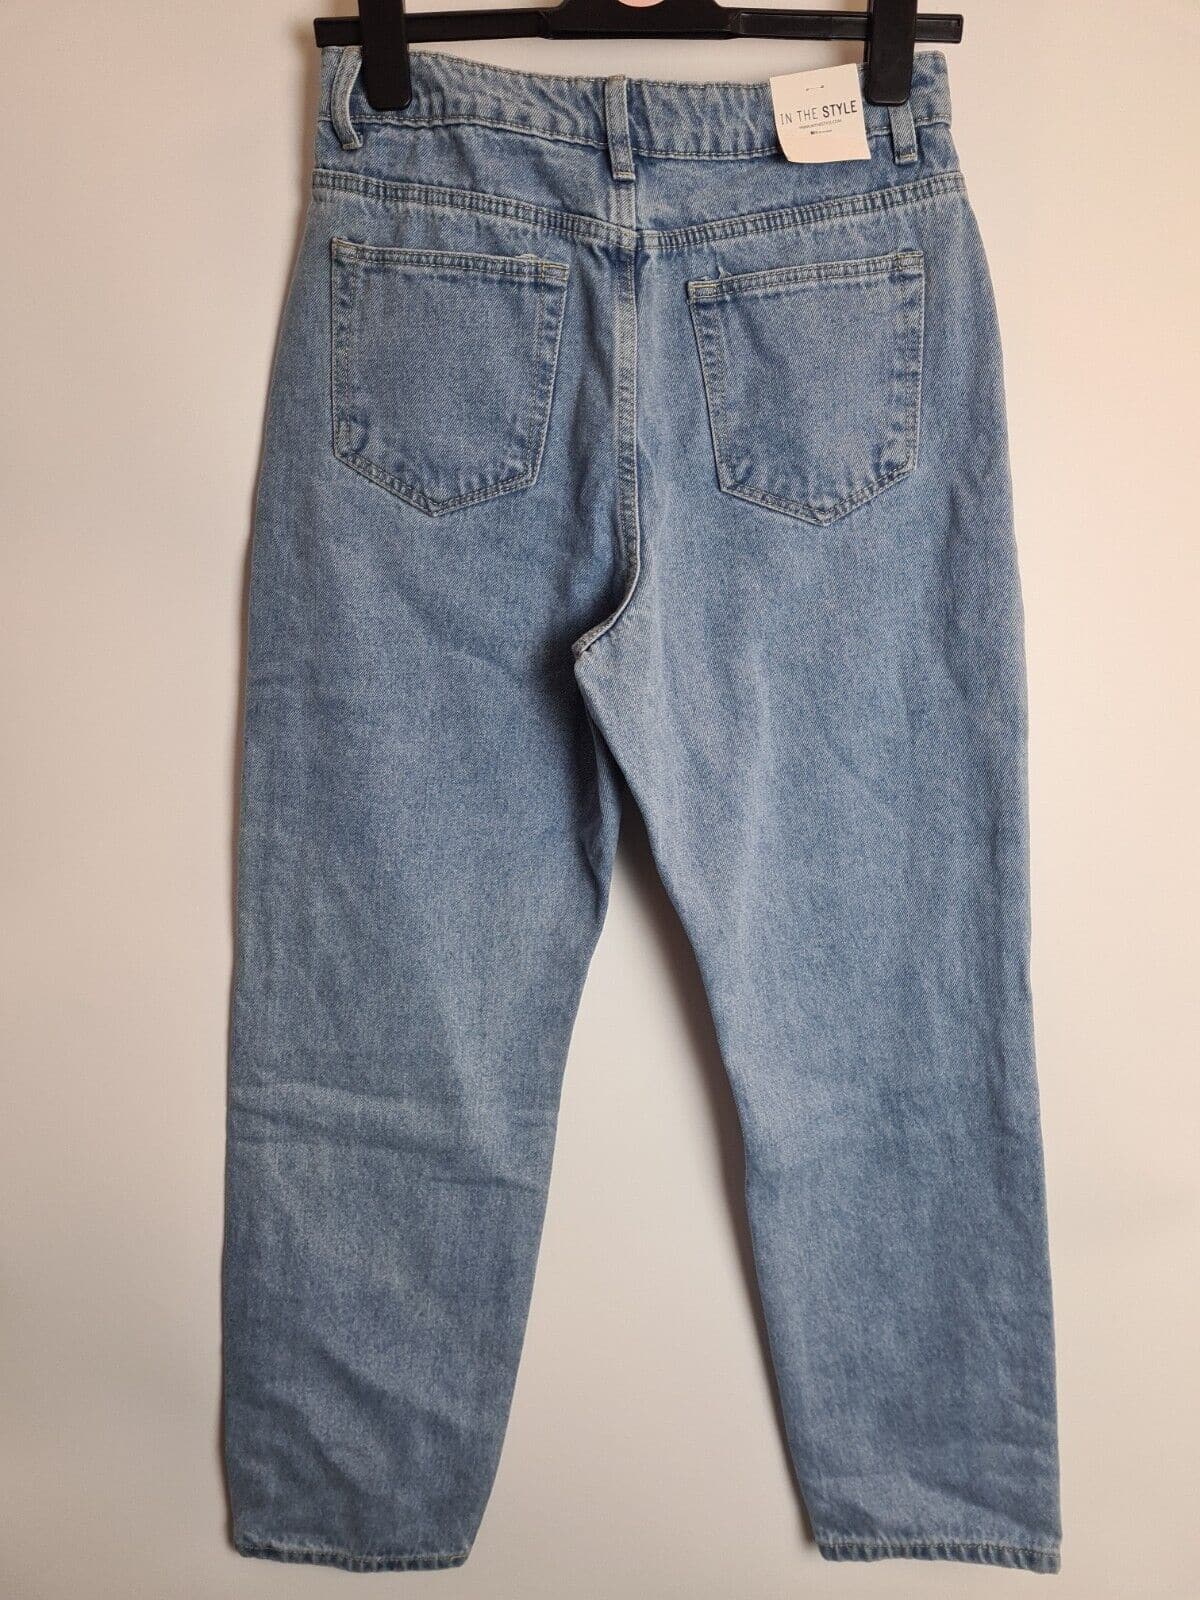 In The Style Perries Sian Light Wash Straight Leg Jeans Size 10 **** V80